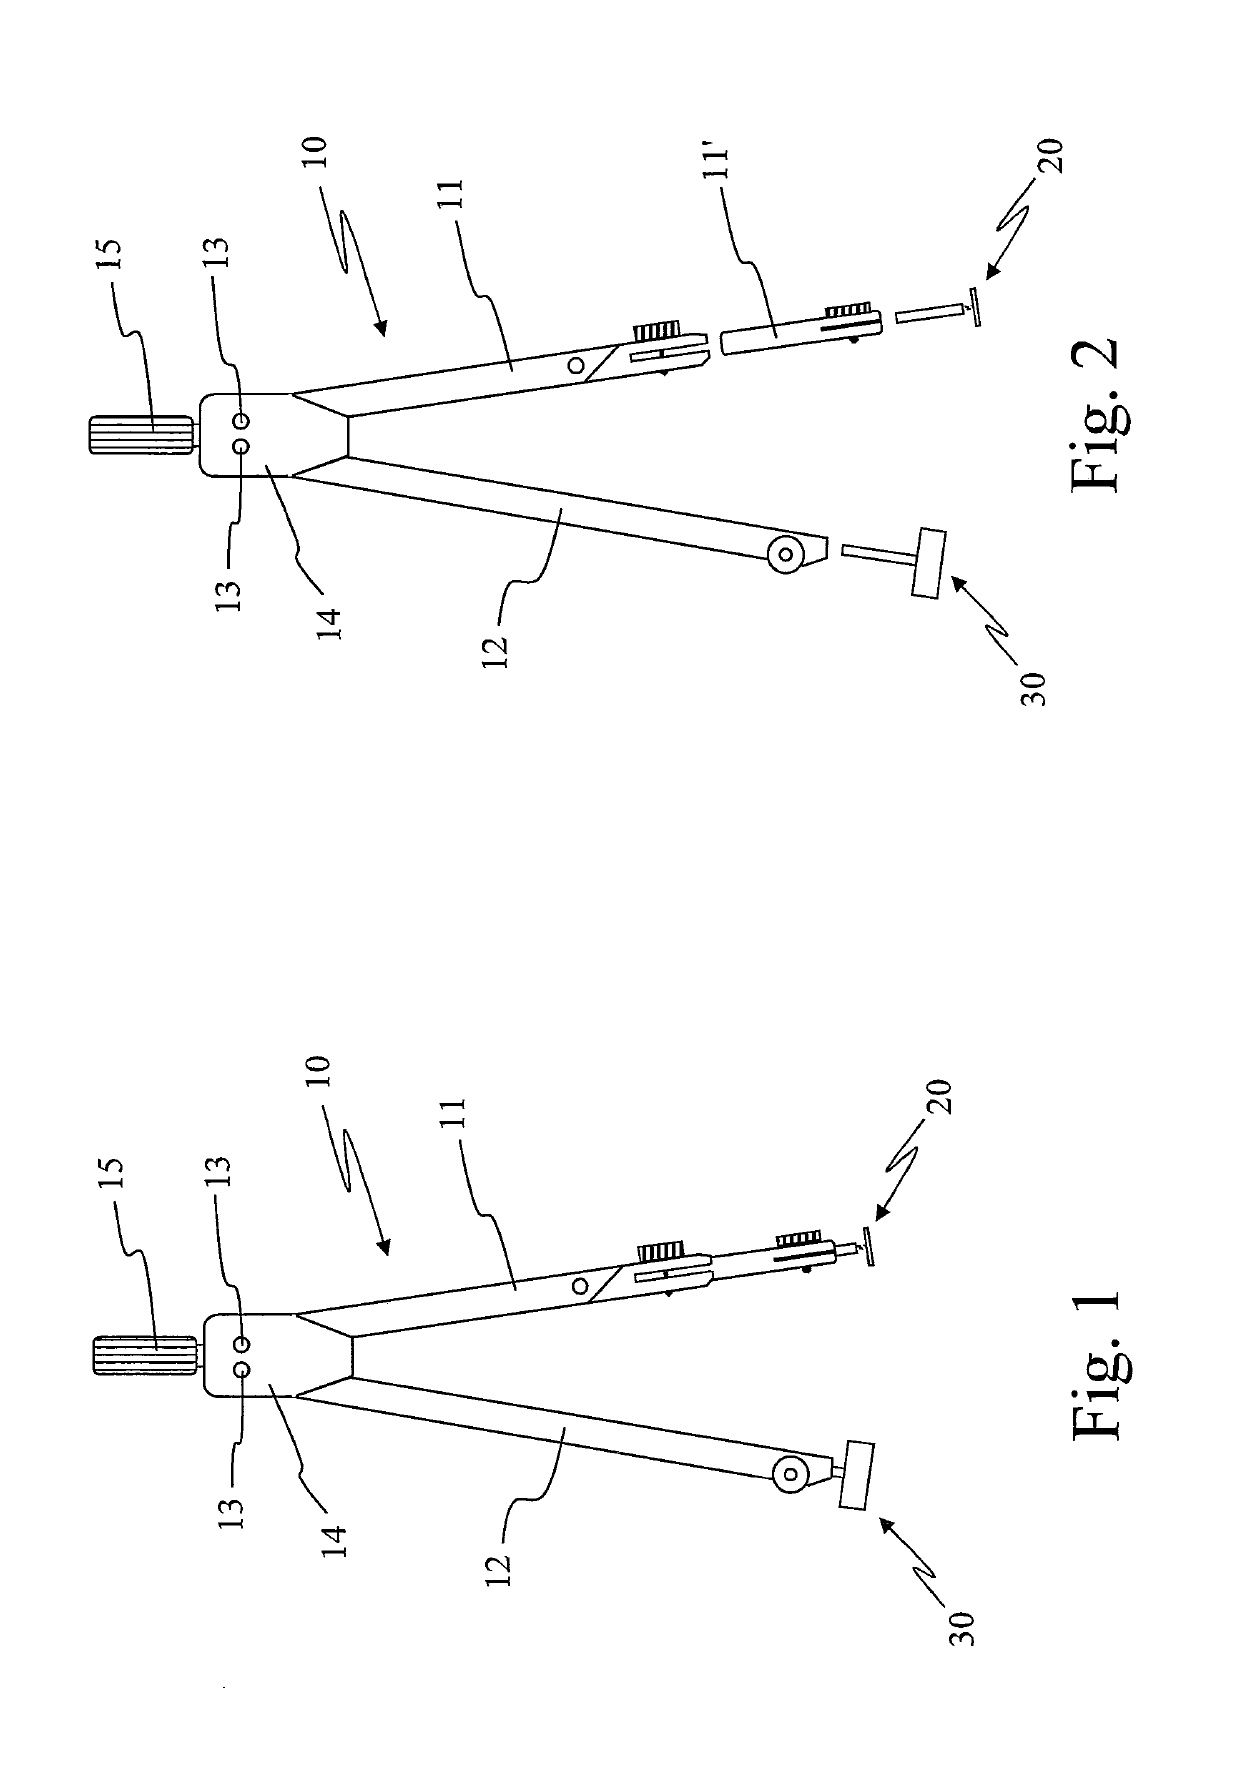 Apparatus and process for drawing lines